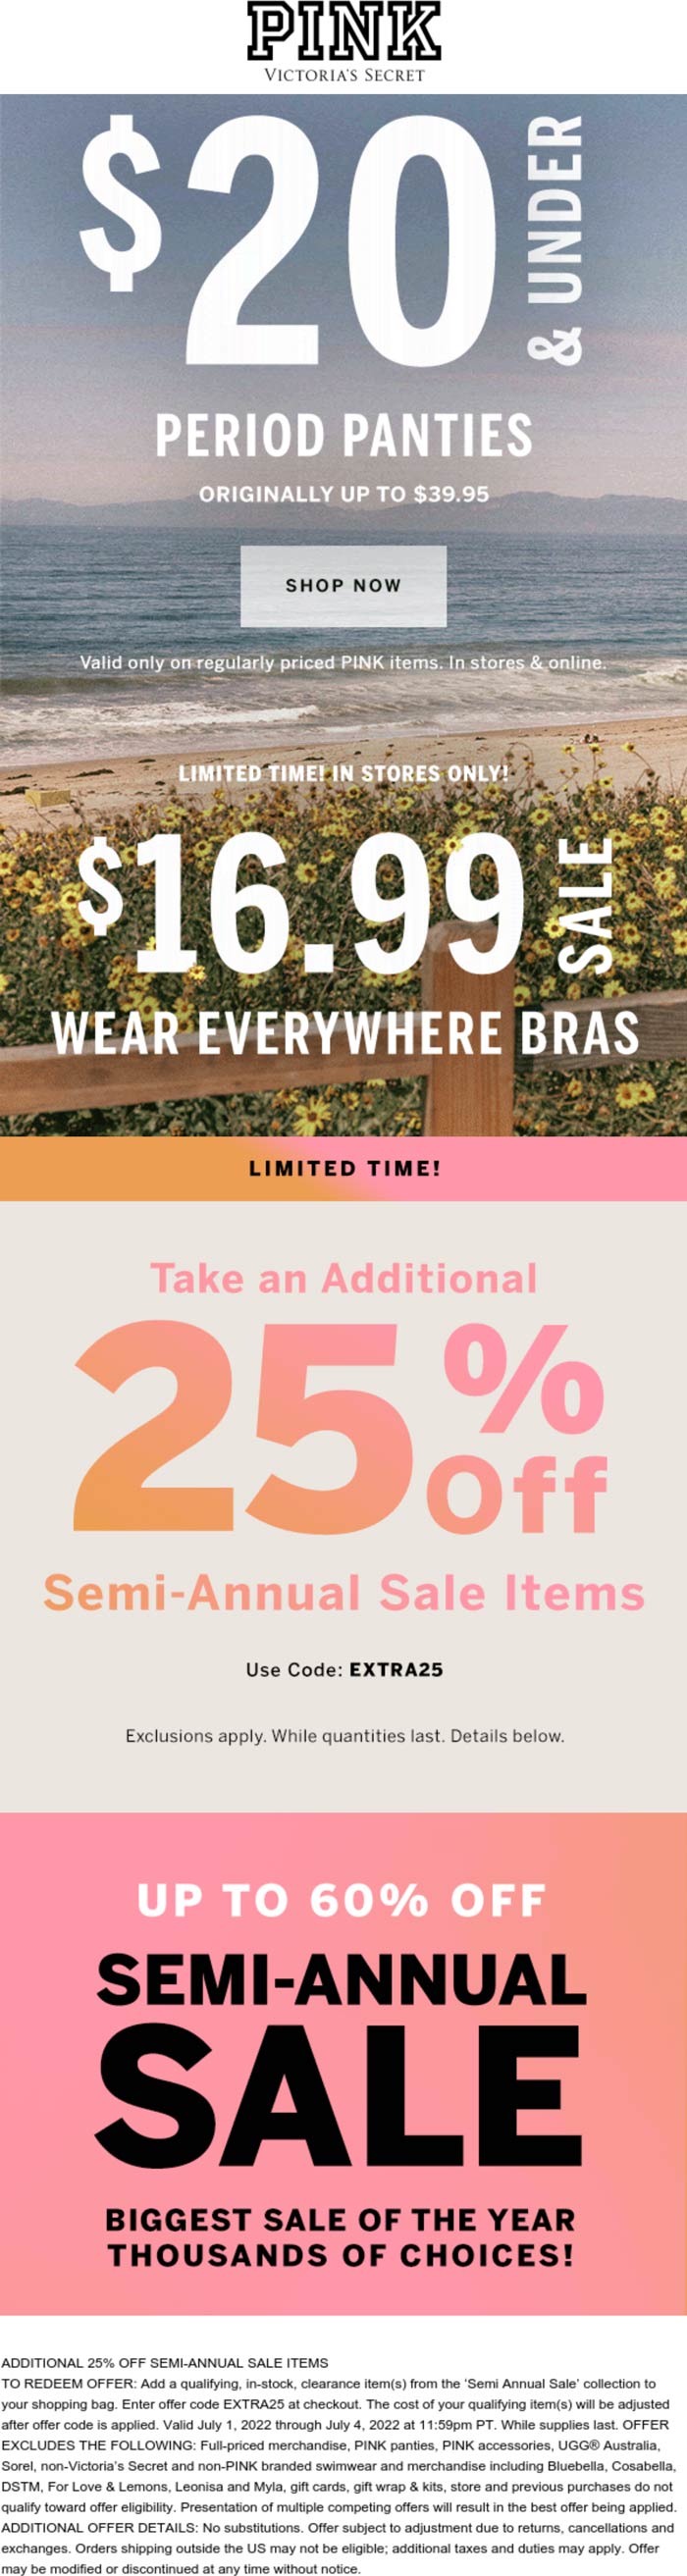 PINK stores Coupon  Extra 25% off sale items at PINK via promo code EXTRA25 #pink 